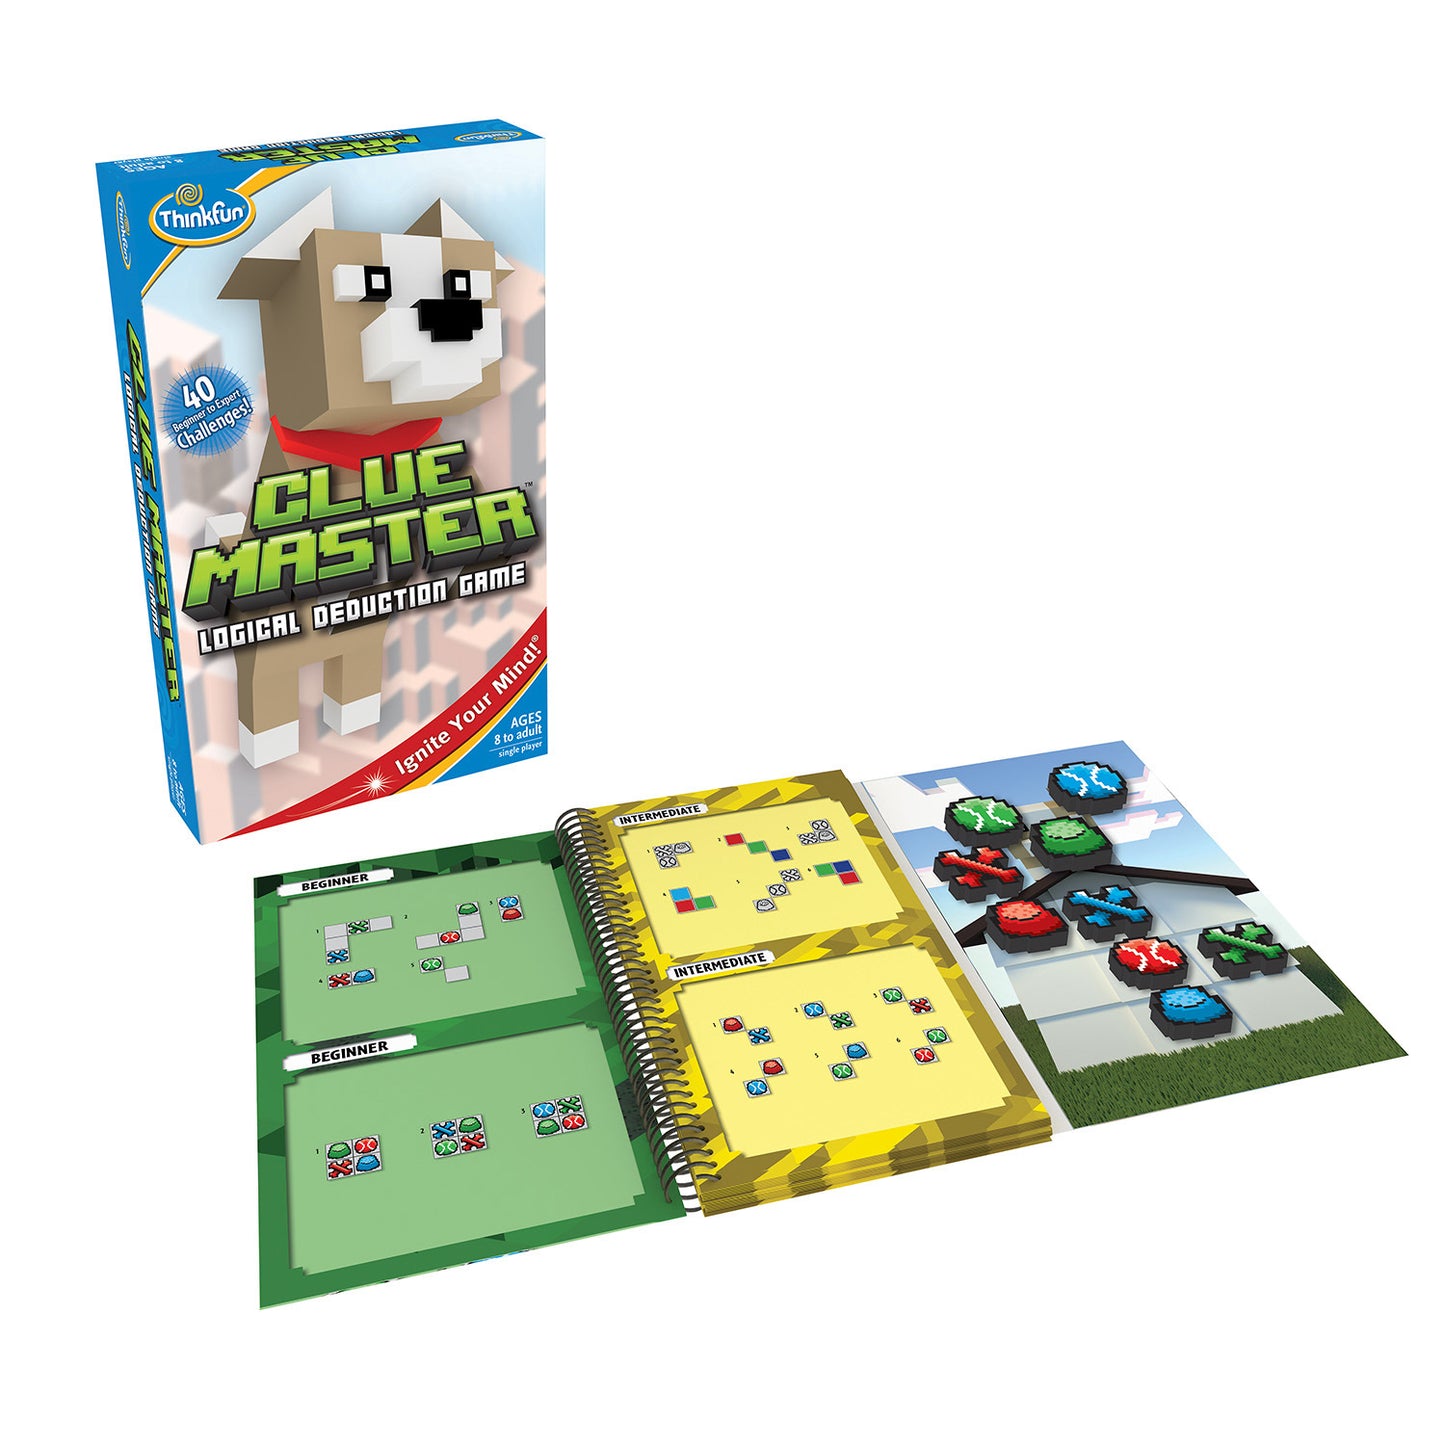 Clue Master - Logical deduction game